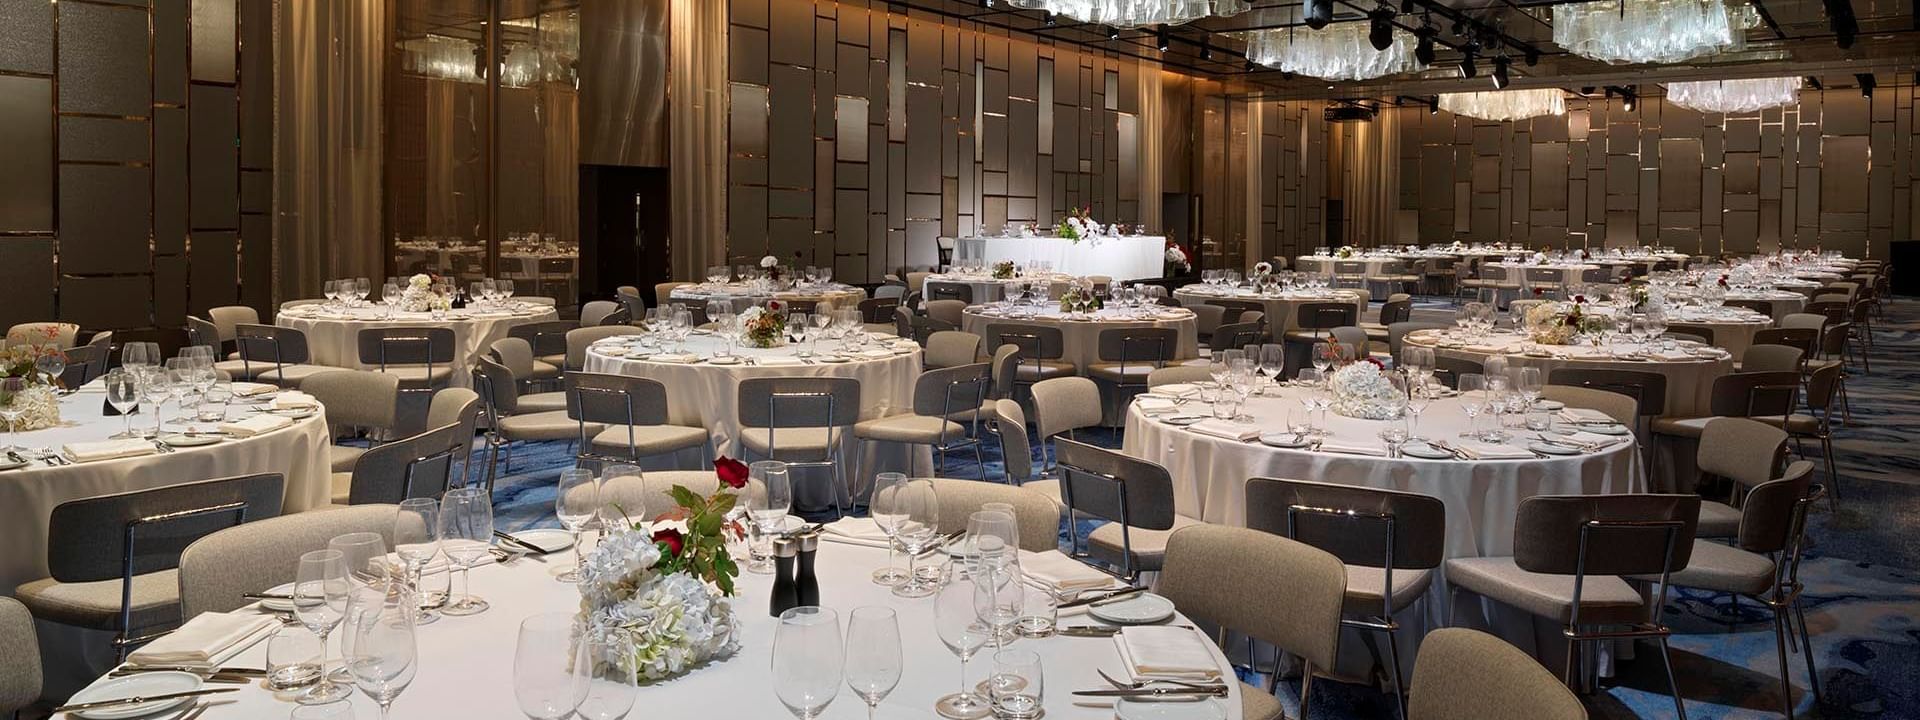 Interior of Pearl Ballroom at Crown Towers Sydney